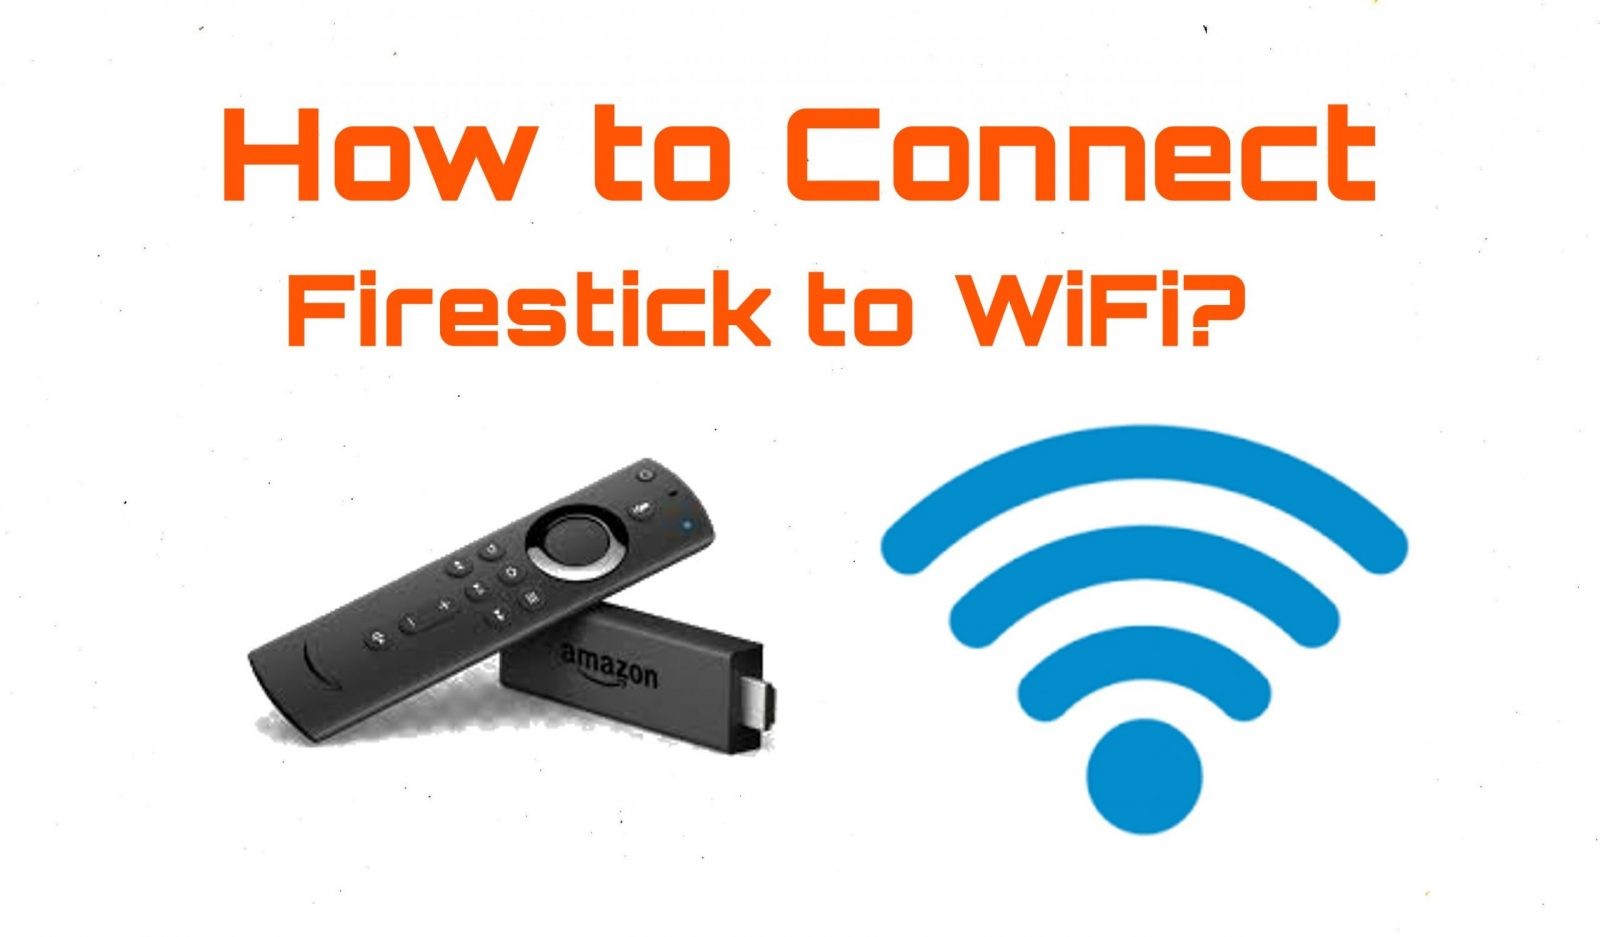 How to Connect Amazon Firestick to WiFi [Steps with Screenshots